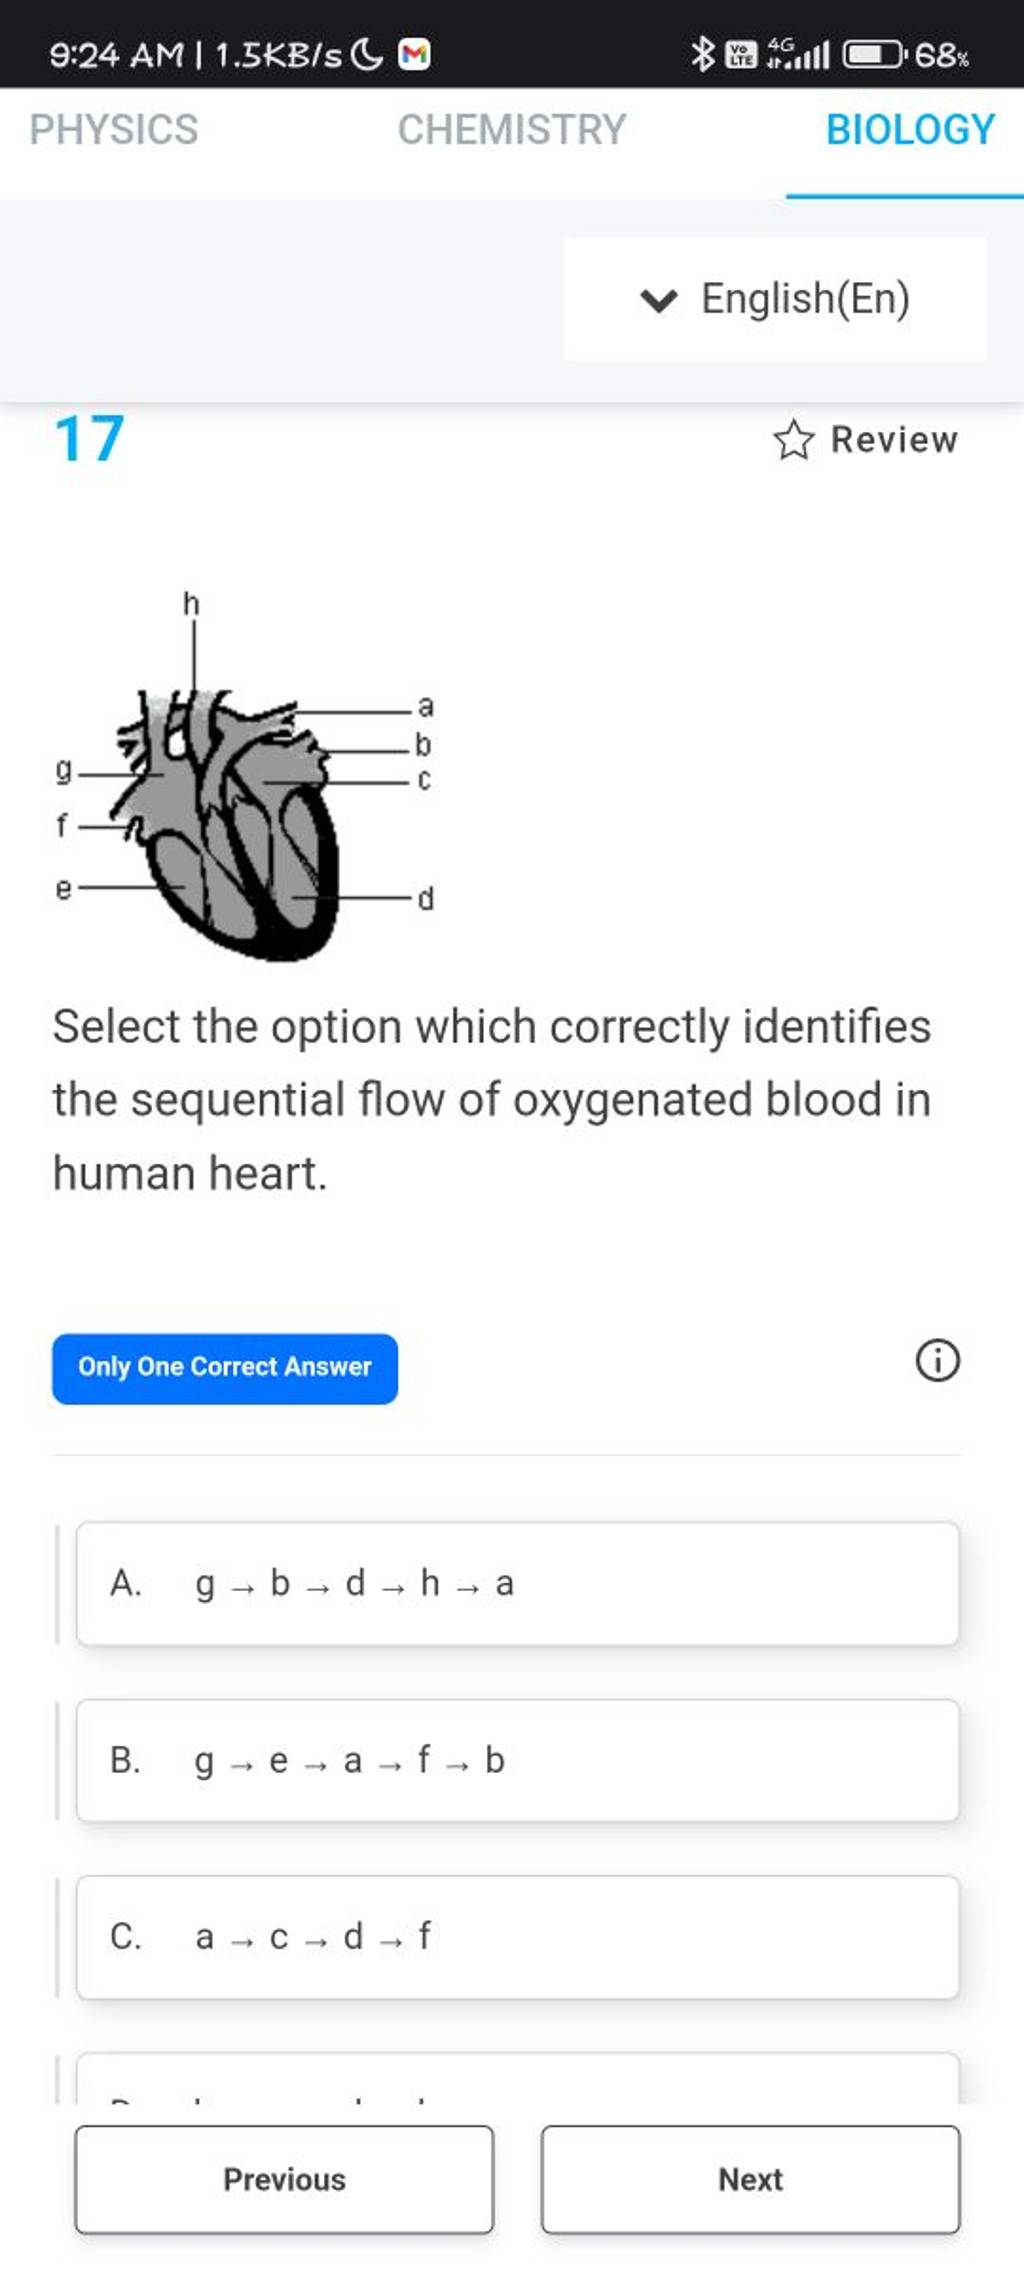 Select the option which correctly identifies the sequential flow of ox